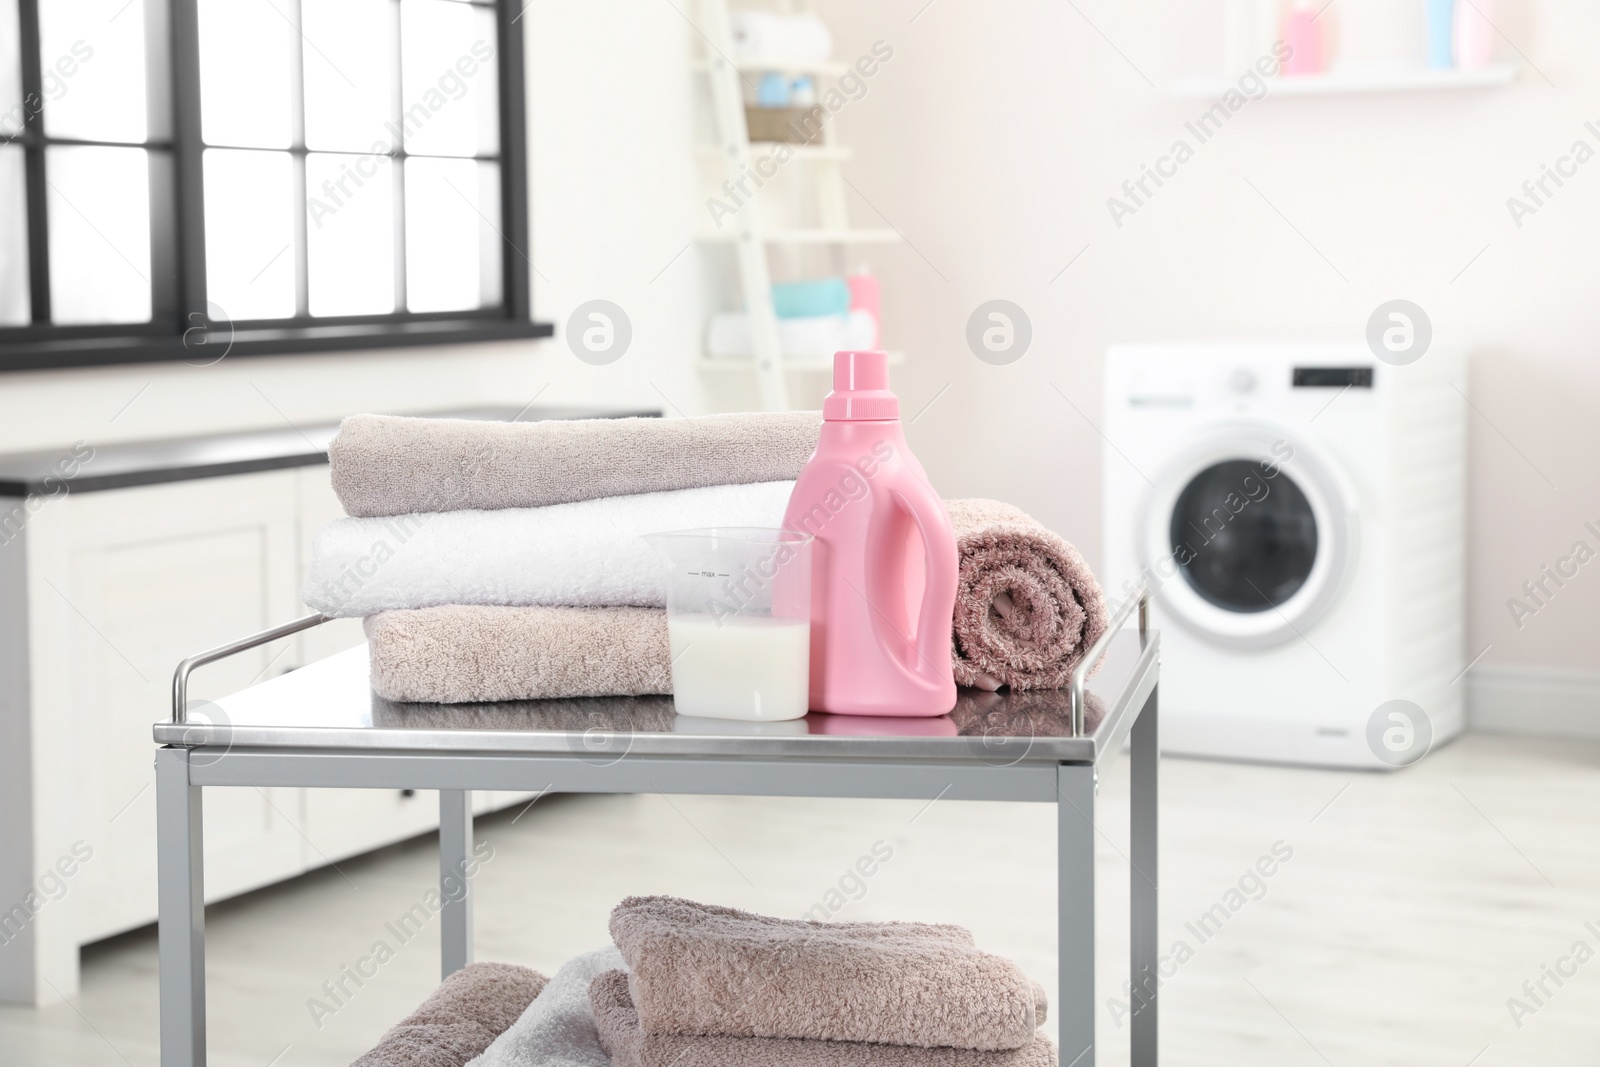 Photo of Soft bath towels and detergent on metal cart against blurred background